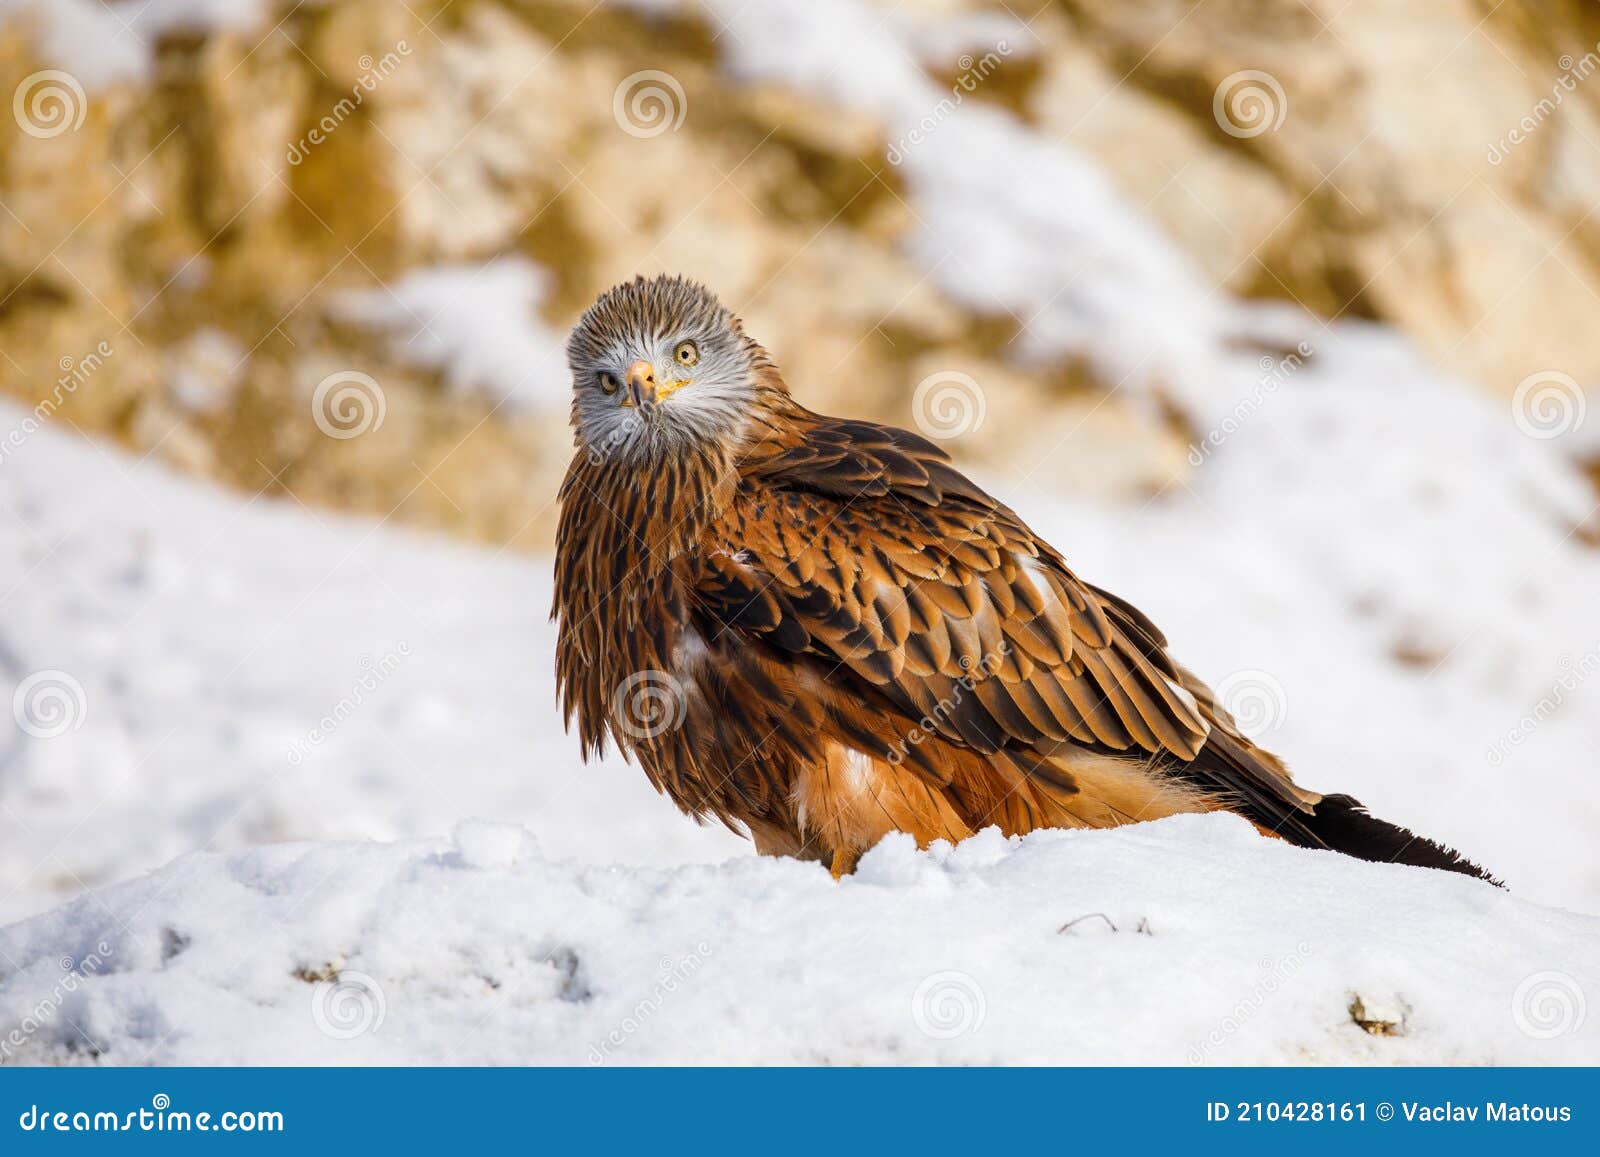 Red Kite, Milvus Perched on Snowy Rock Sunny Cold Day. Endangered Bird of with Red Feather Stock Image - Image of african, eagle: 210428161